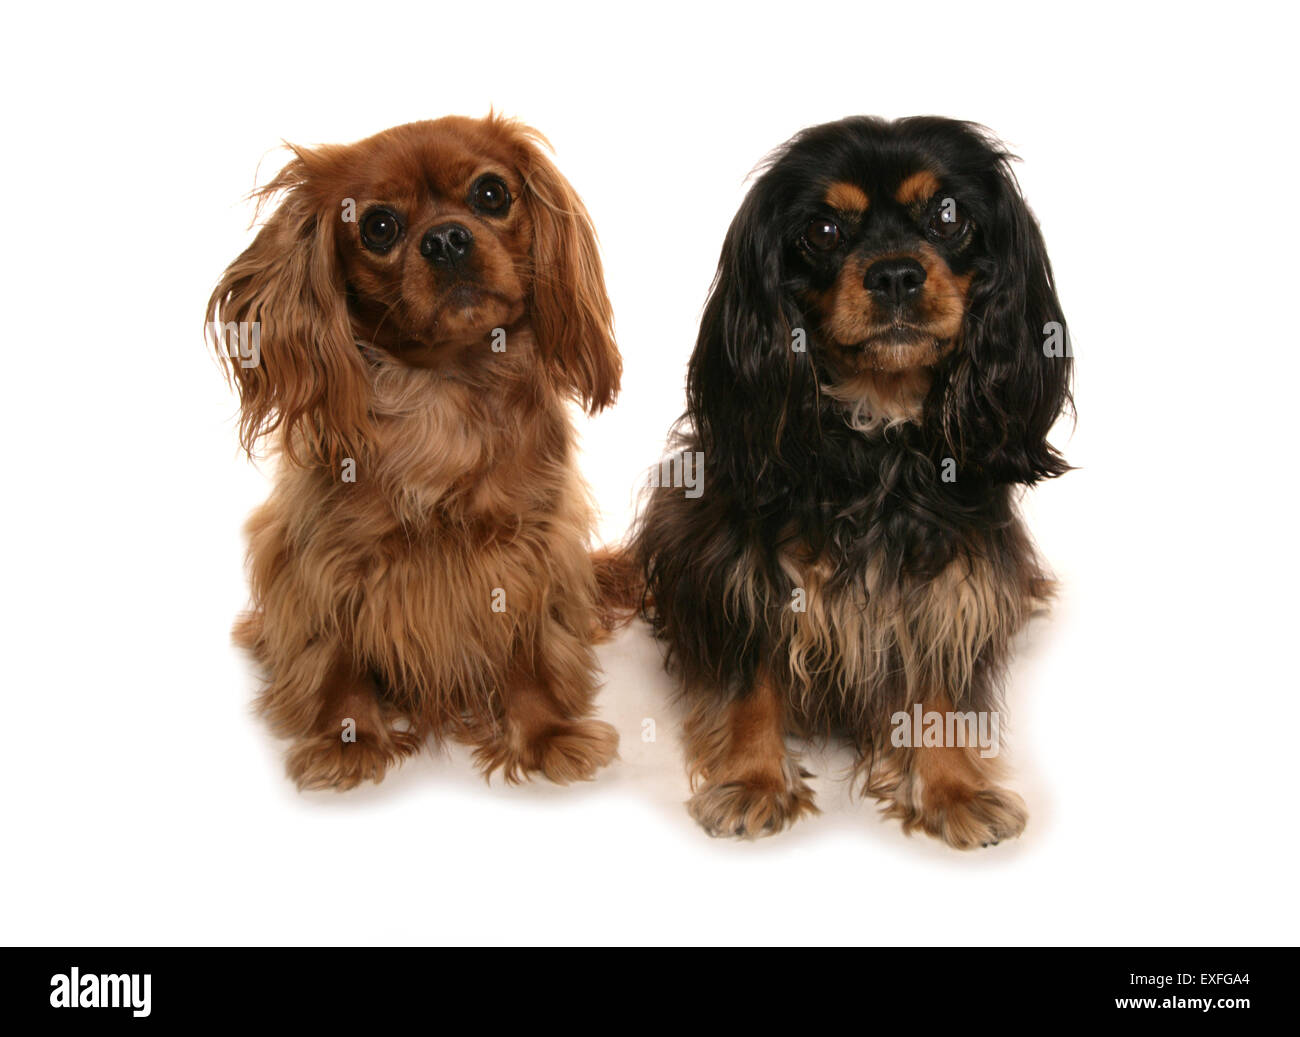 Cavalier king charles spaniel Two adults sitting in a studio Stock Photo